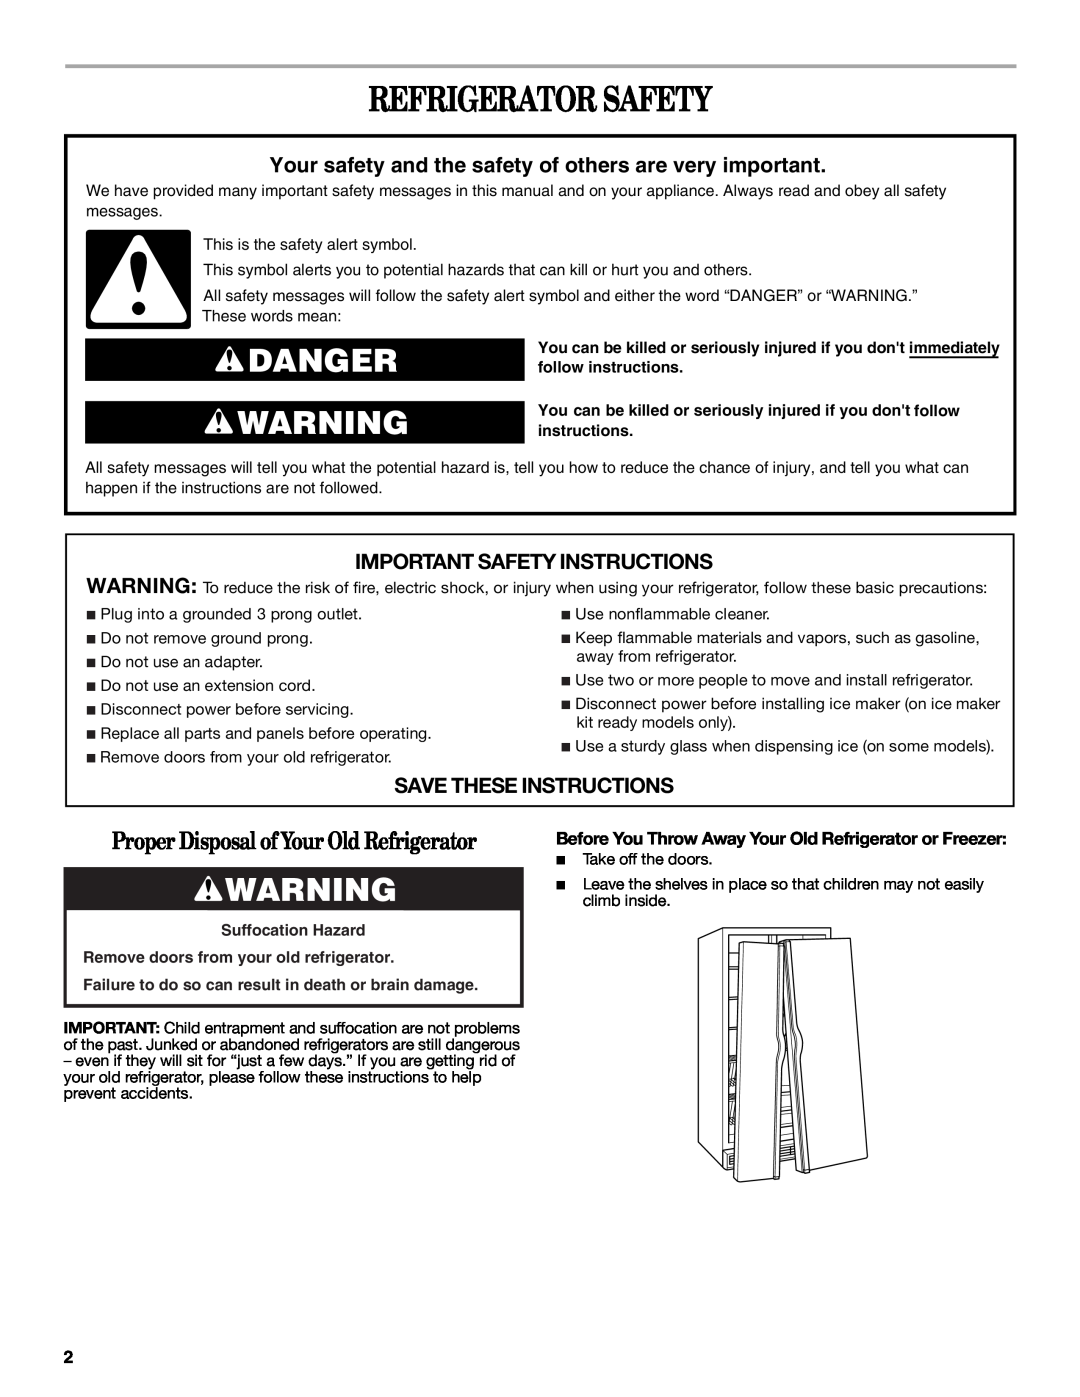 Whirlpool REFRIGERATOR USE & CARE GUIDE warranty Refrigerator Safety, Danger, Important Safety Instructions 